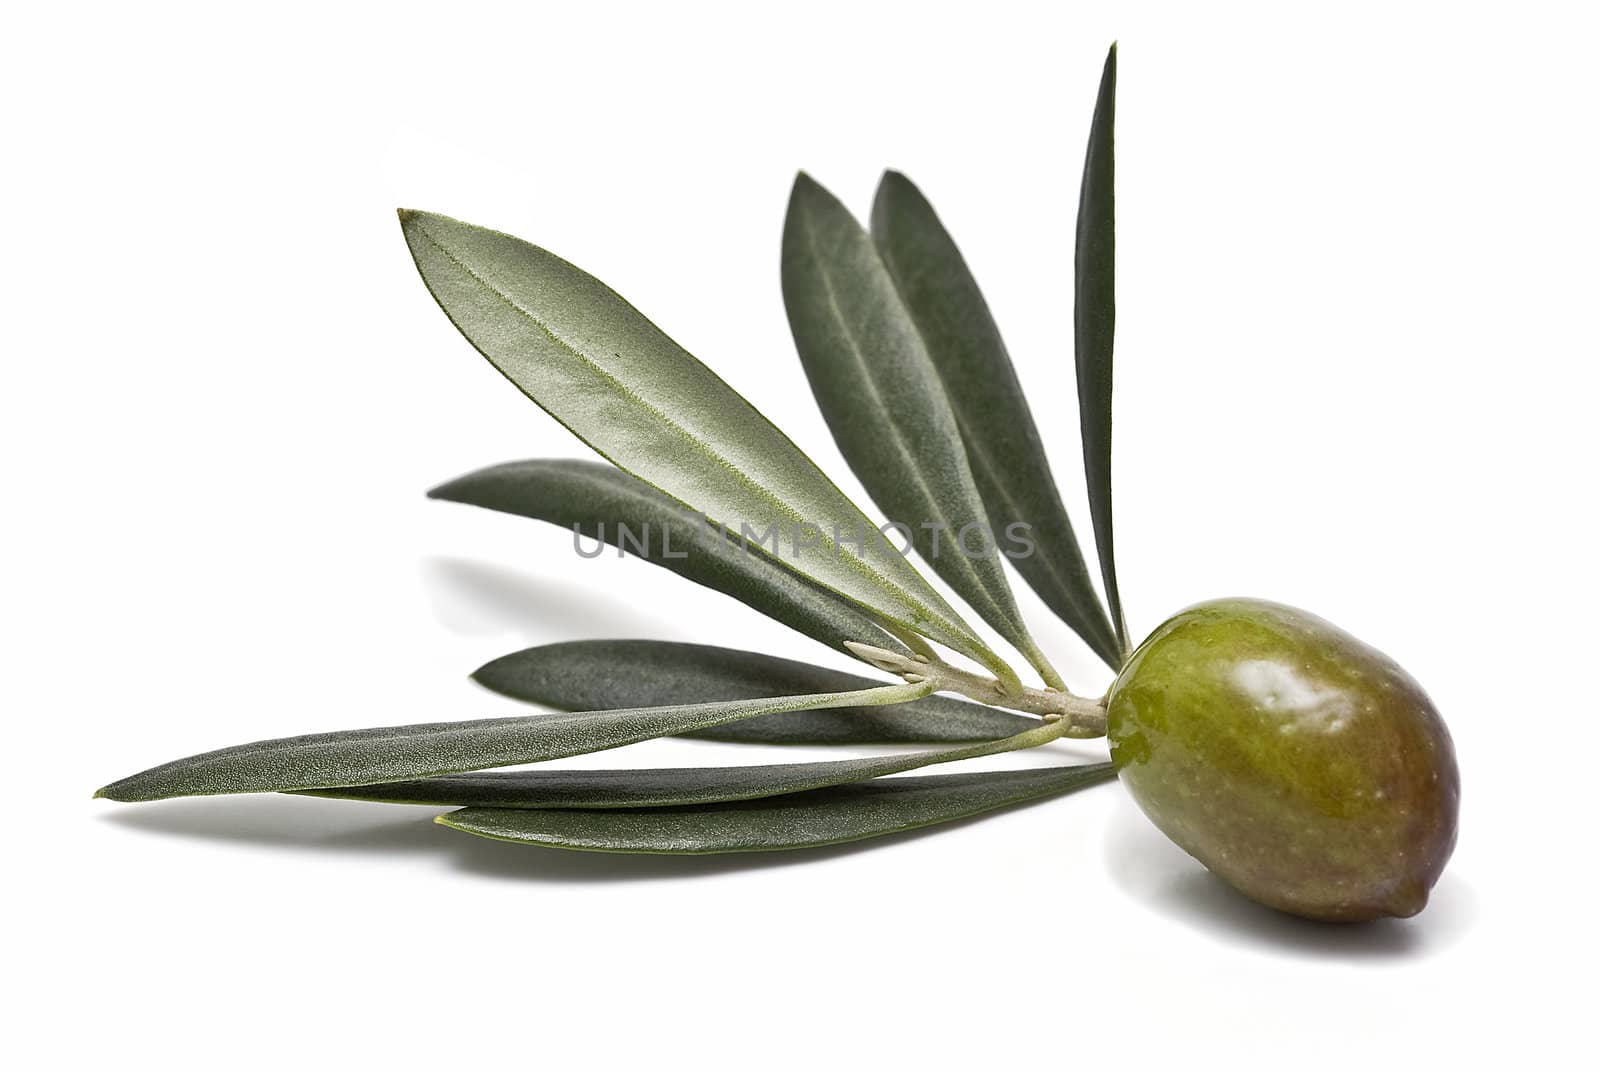 A branch with one olive.